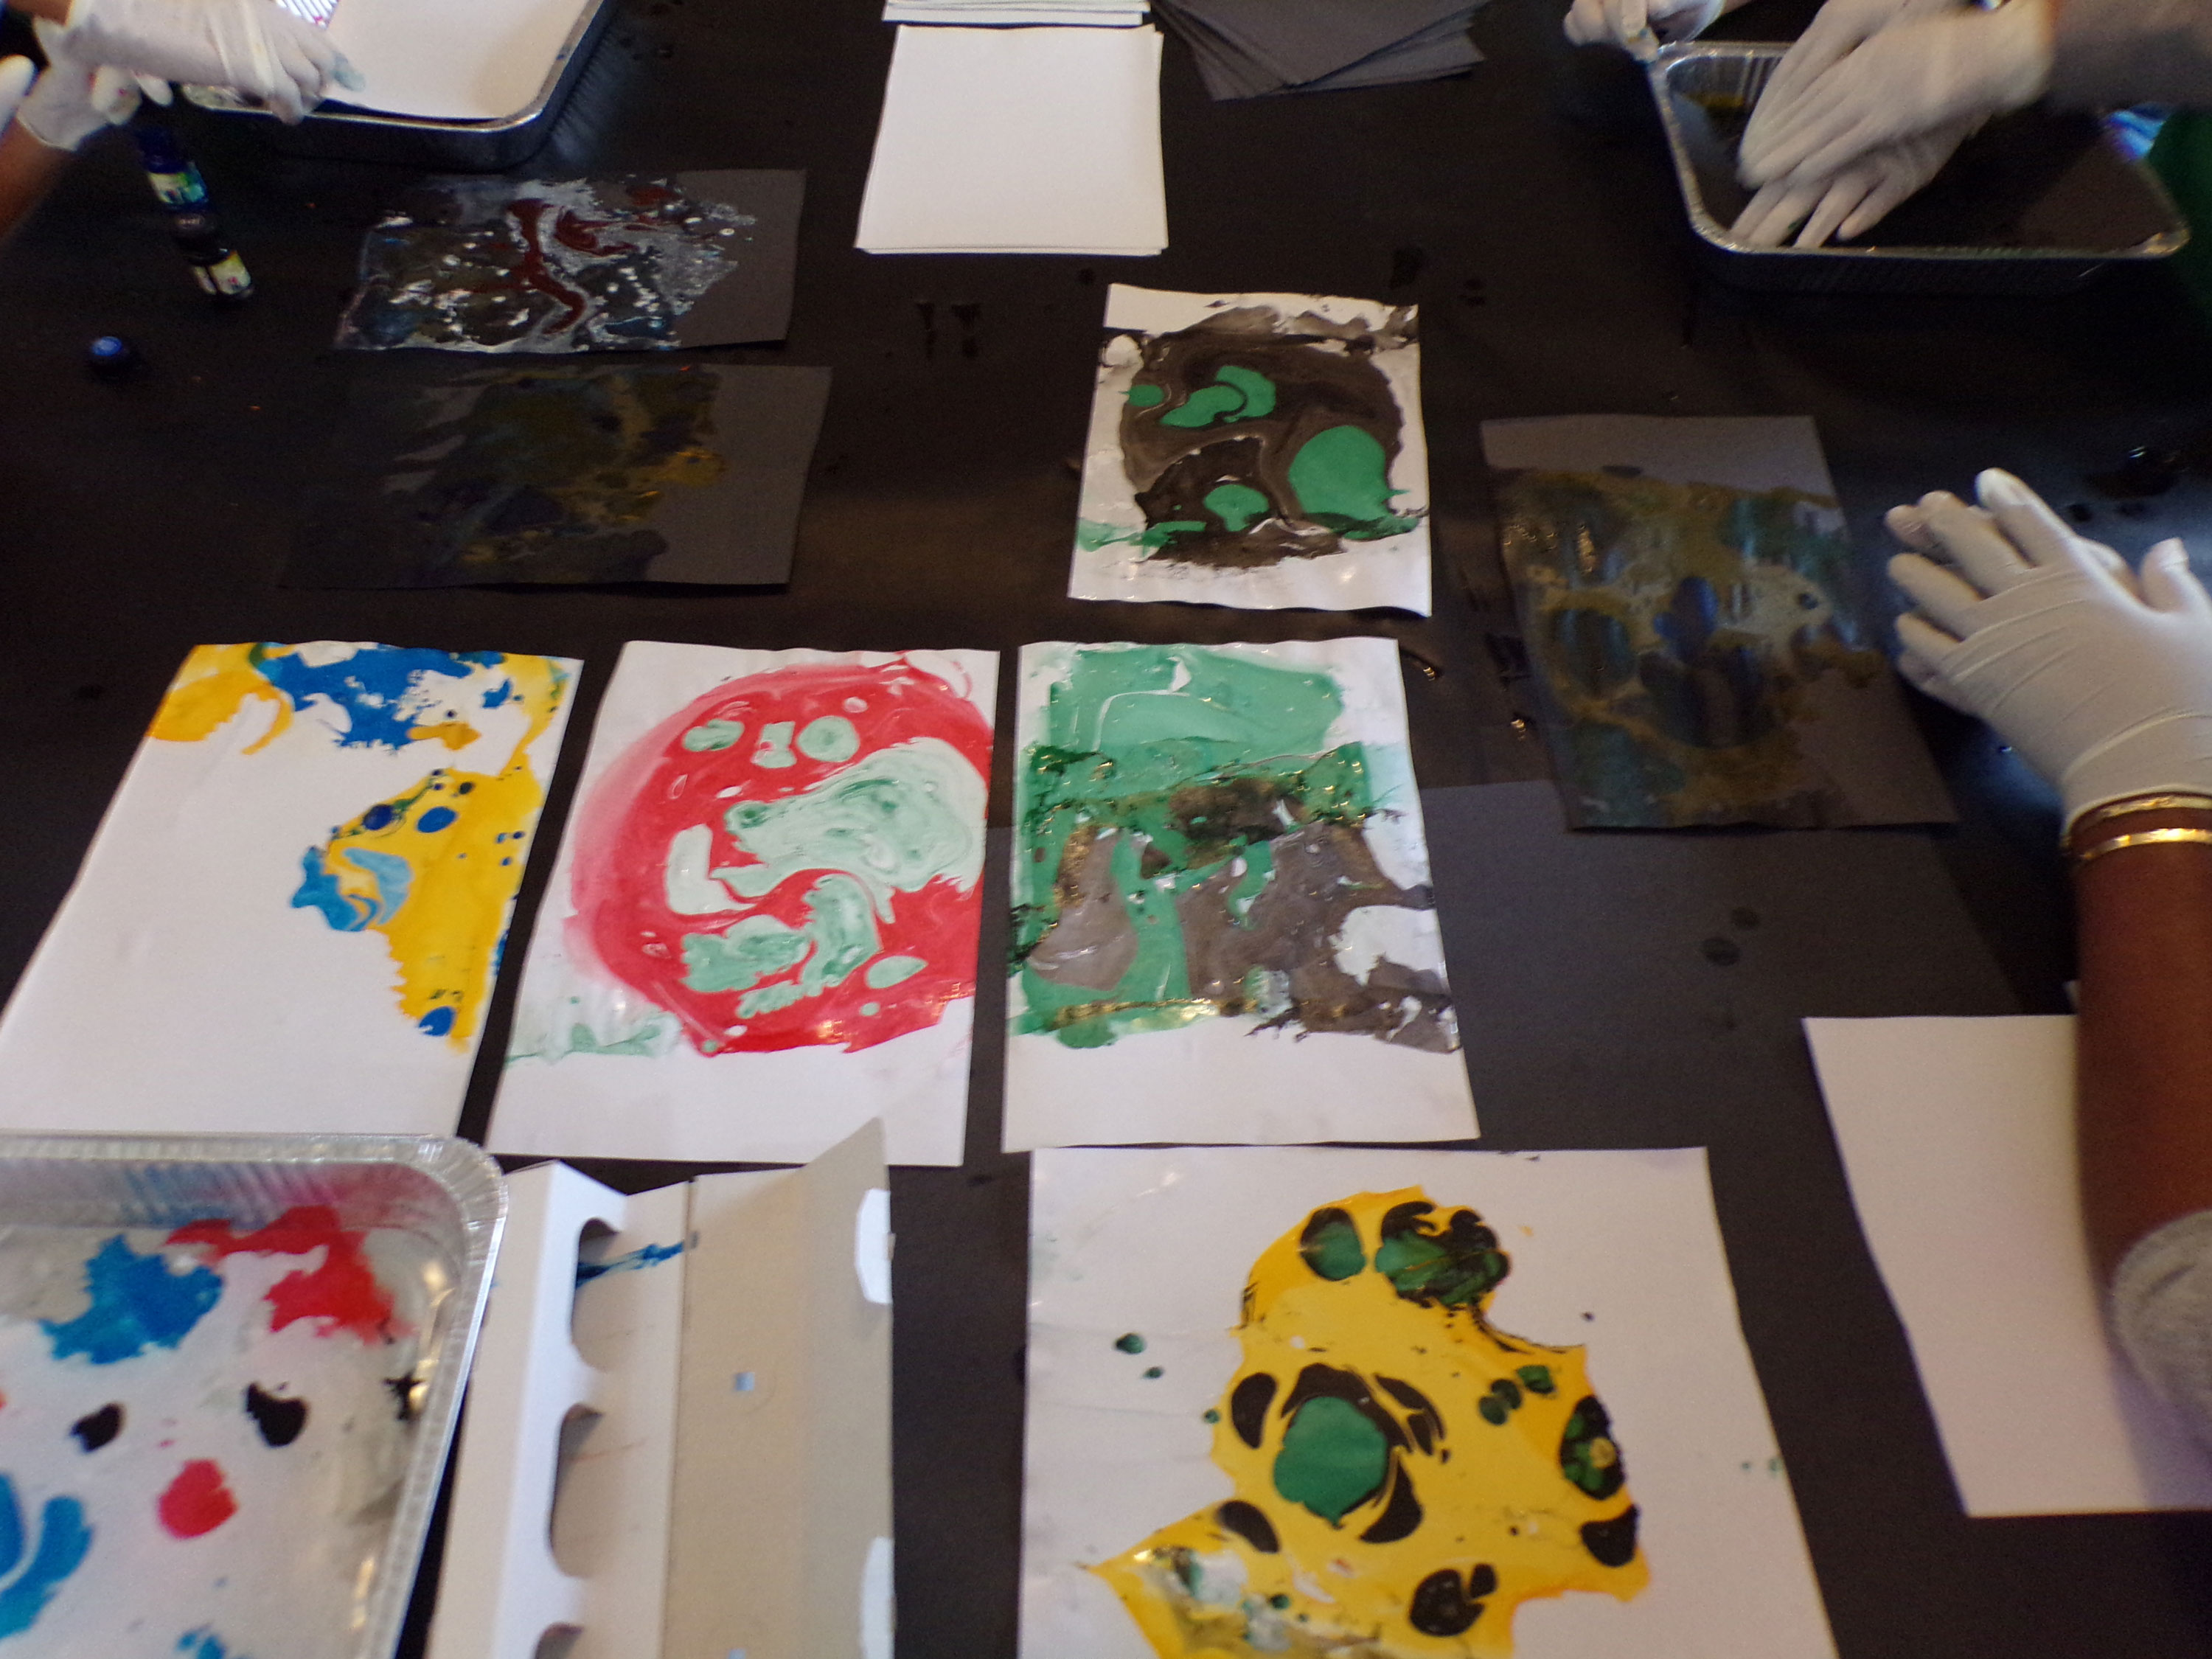 A collection of colourful marbling paper created by the young people